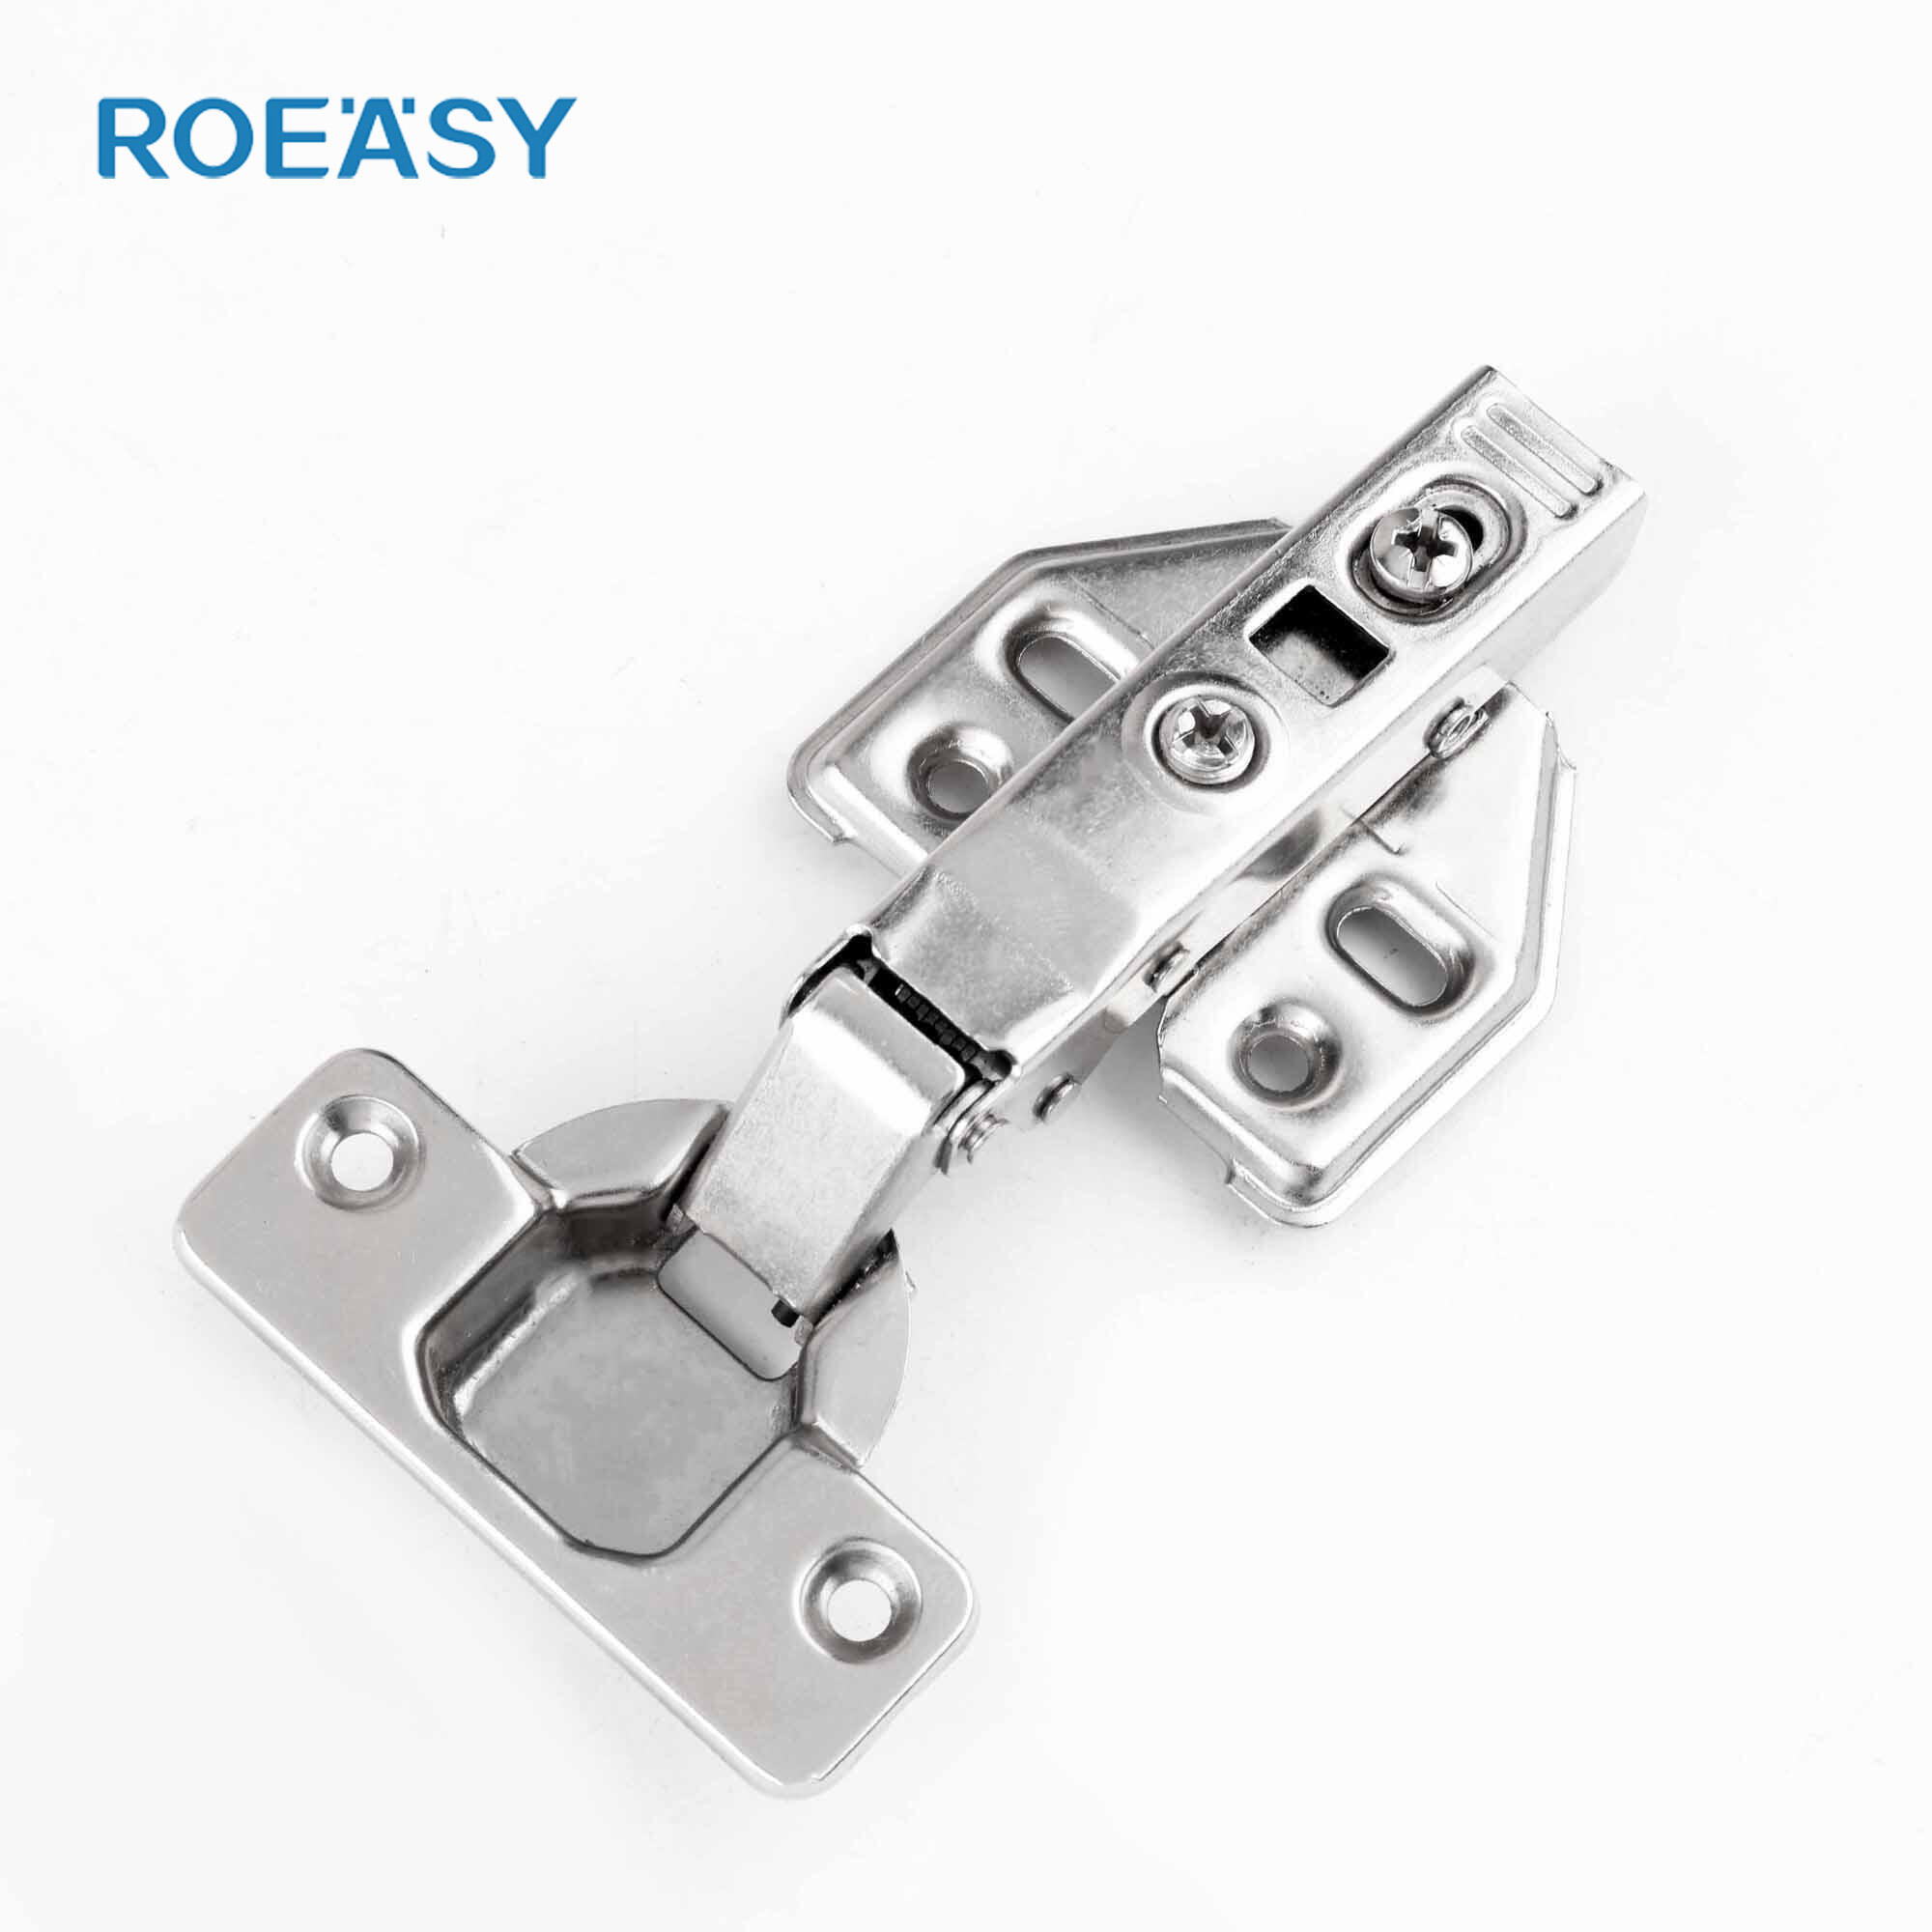 Roeasy CH-293D 35mm 95 degree hinge clip-on soft close cabinet hinge